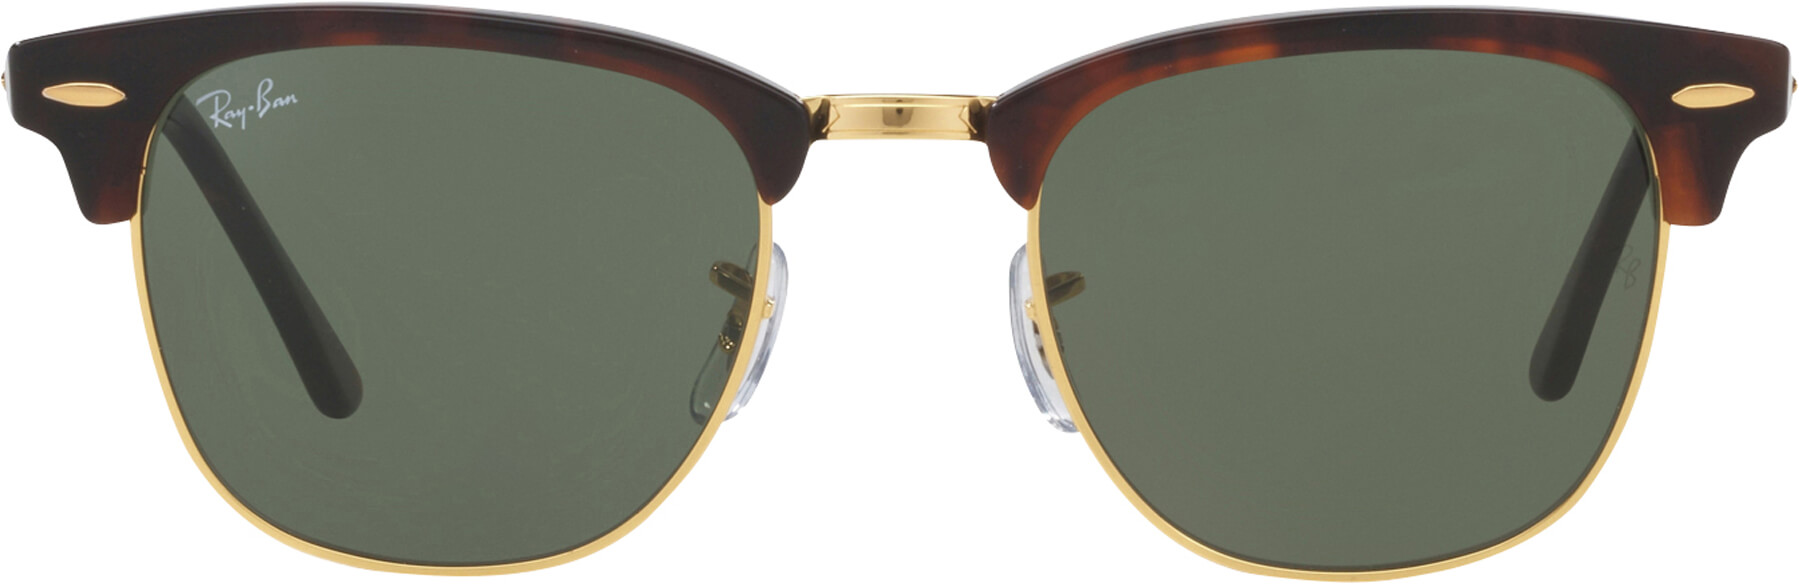 Ray-Ban CLUBMASTER 3016 image number null